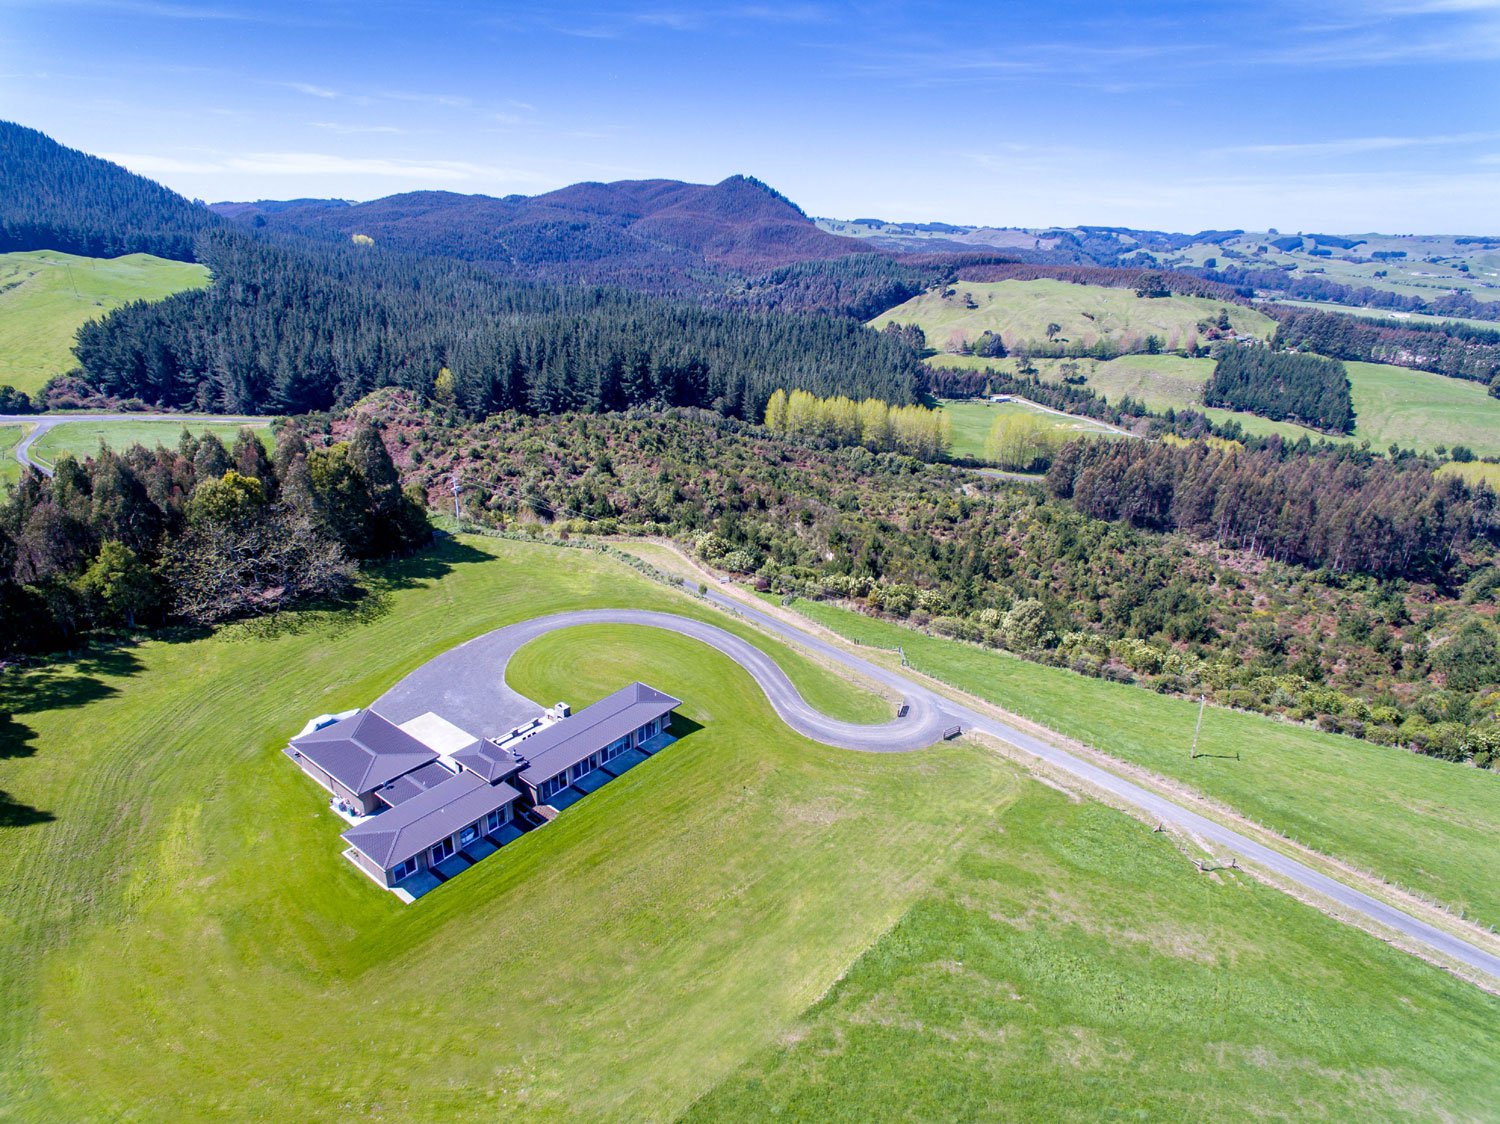 This 265-acre dream estate on New Zealand’s North Island is set against the dramatic backdrop of Mount Tongariro and Lake Taupo, New Zealand’s largest lake.